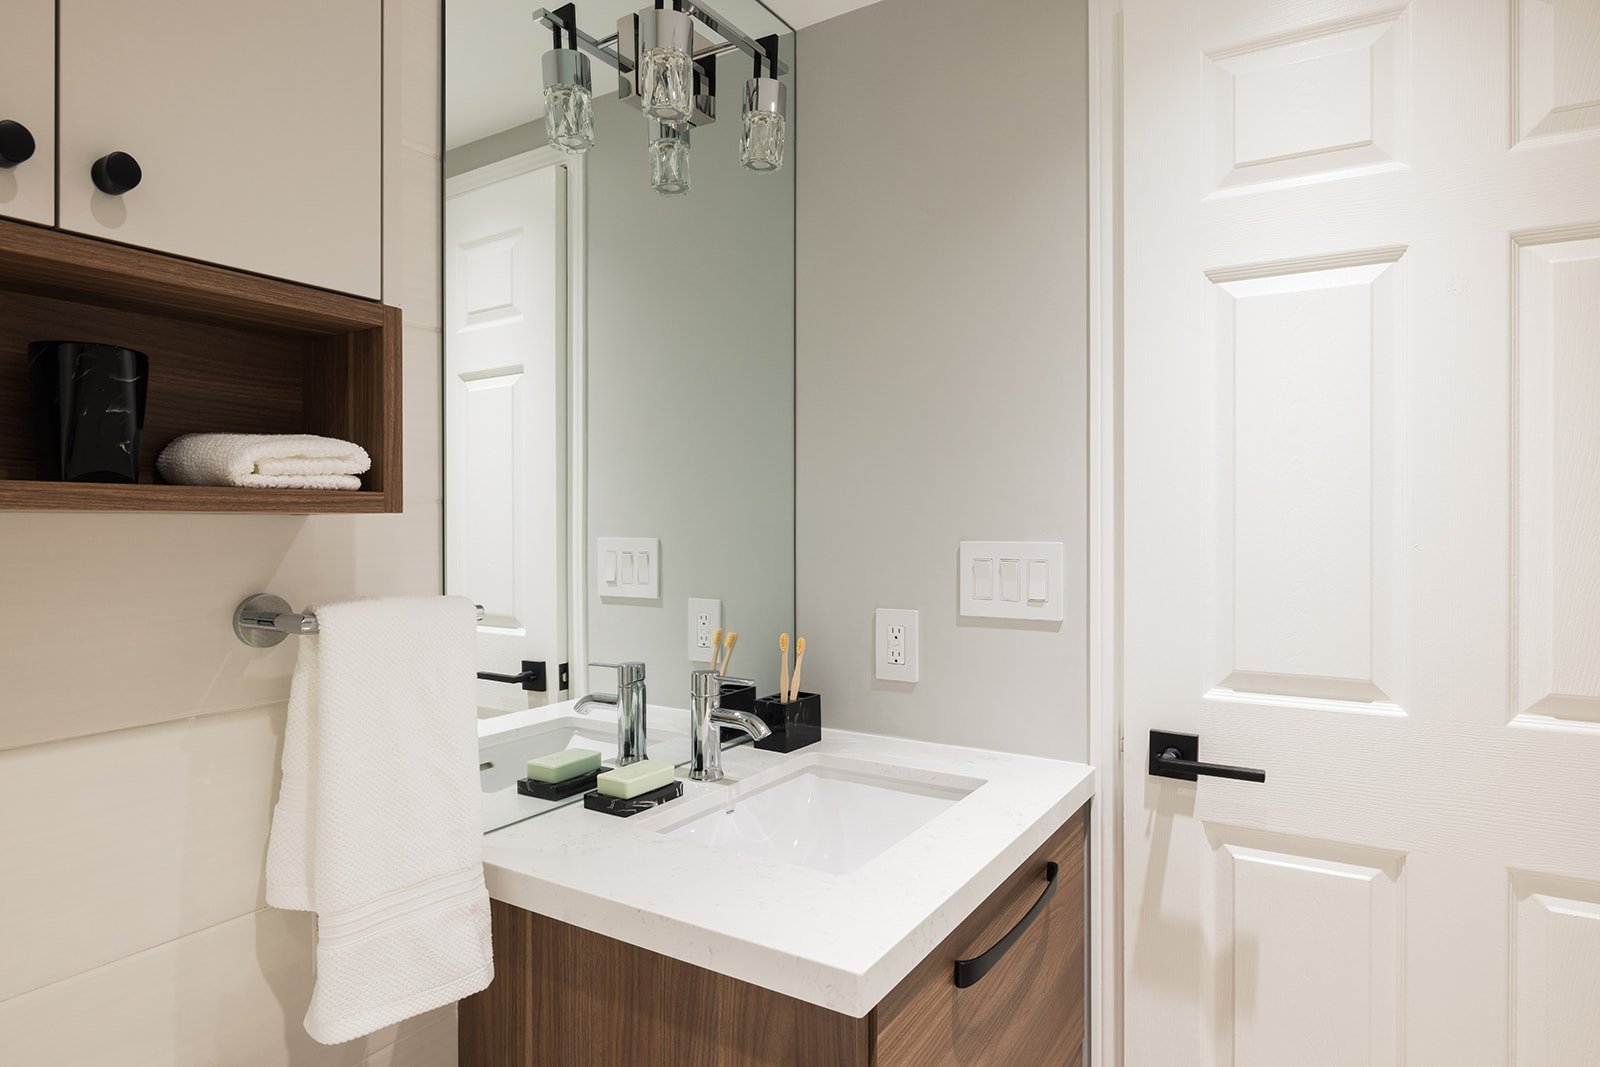 GTA condo bathroom renovation with white vanity top and wood base